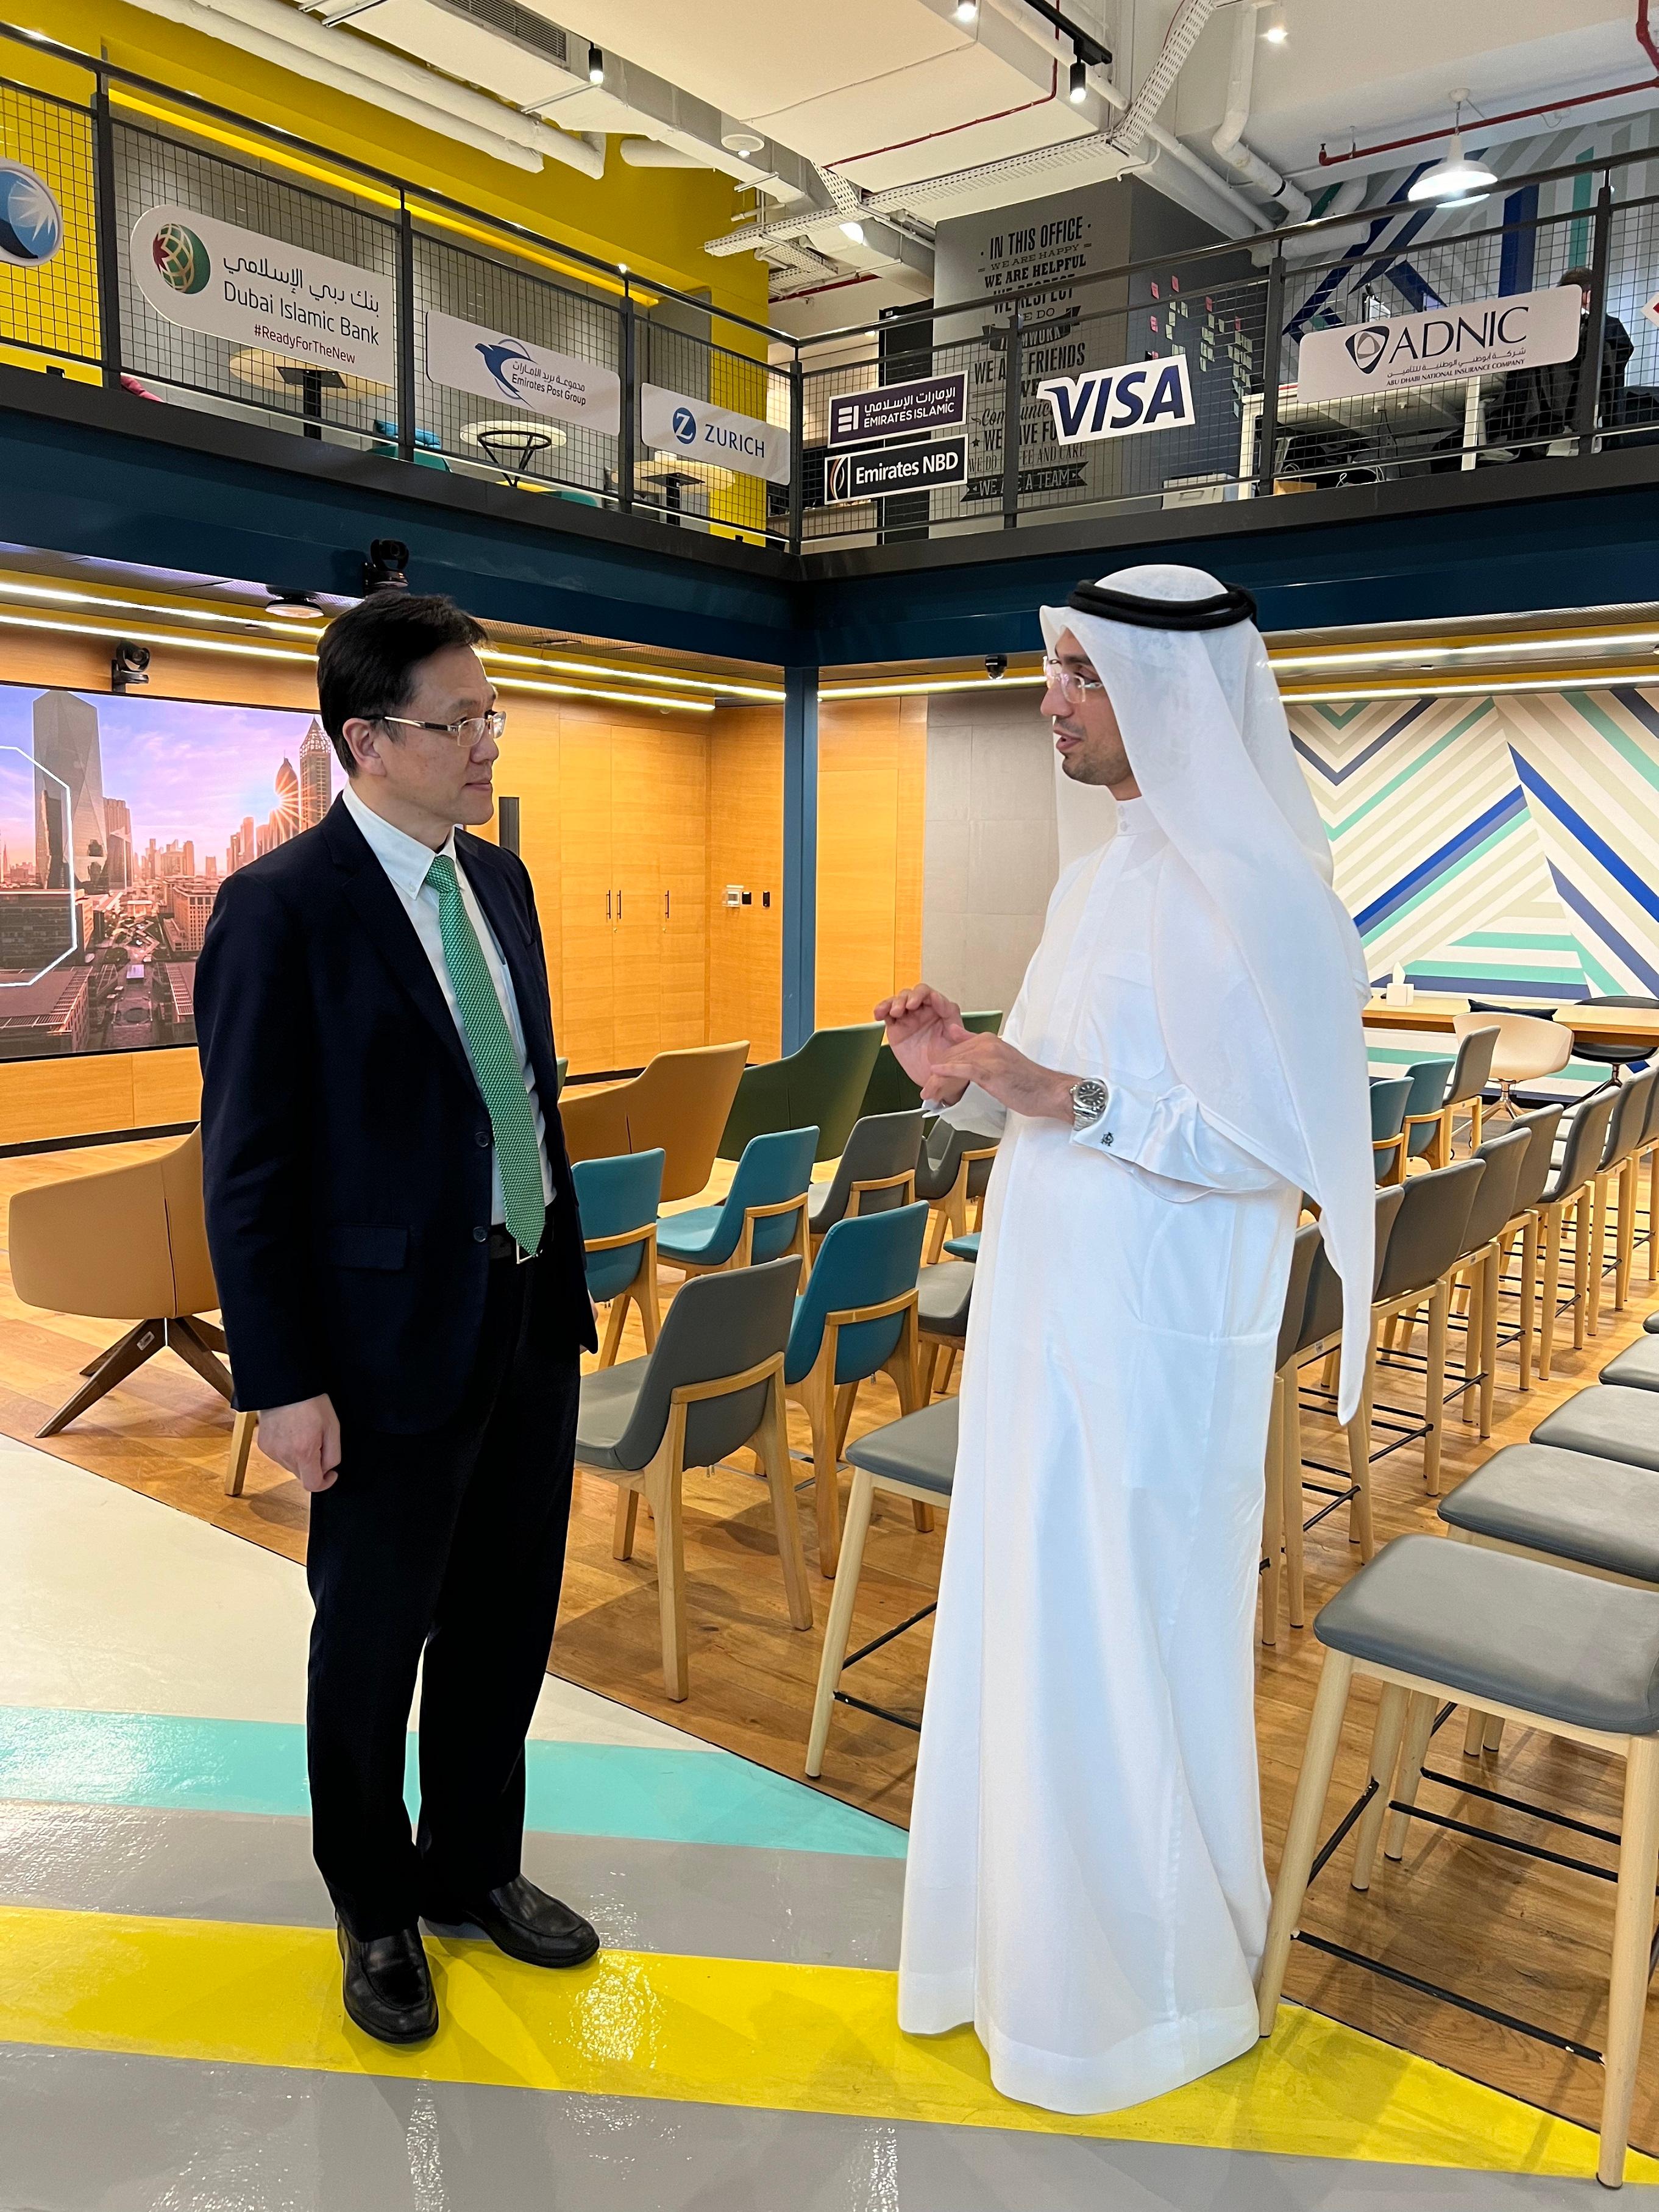 The Secretary for Innovation, Technology and Industry, Professor Sun Dong (left), on March 6 (Dubai time) visited the Dubai International Financial Centre Innovation Hub to meet with its Chief Executive Officer, Mr Mohammad Alblooshi (right).
